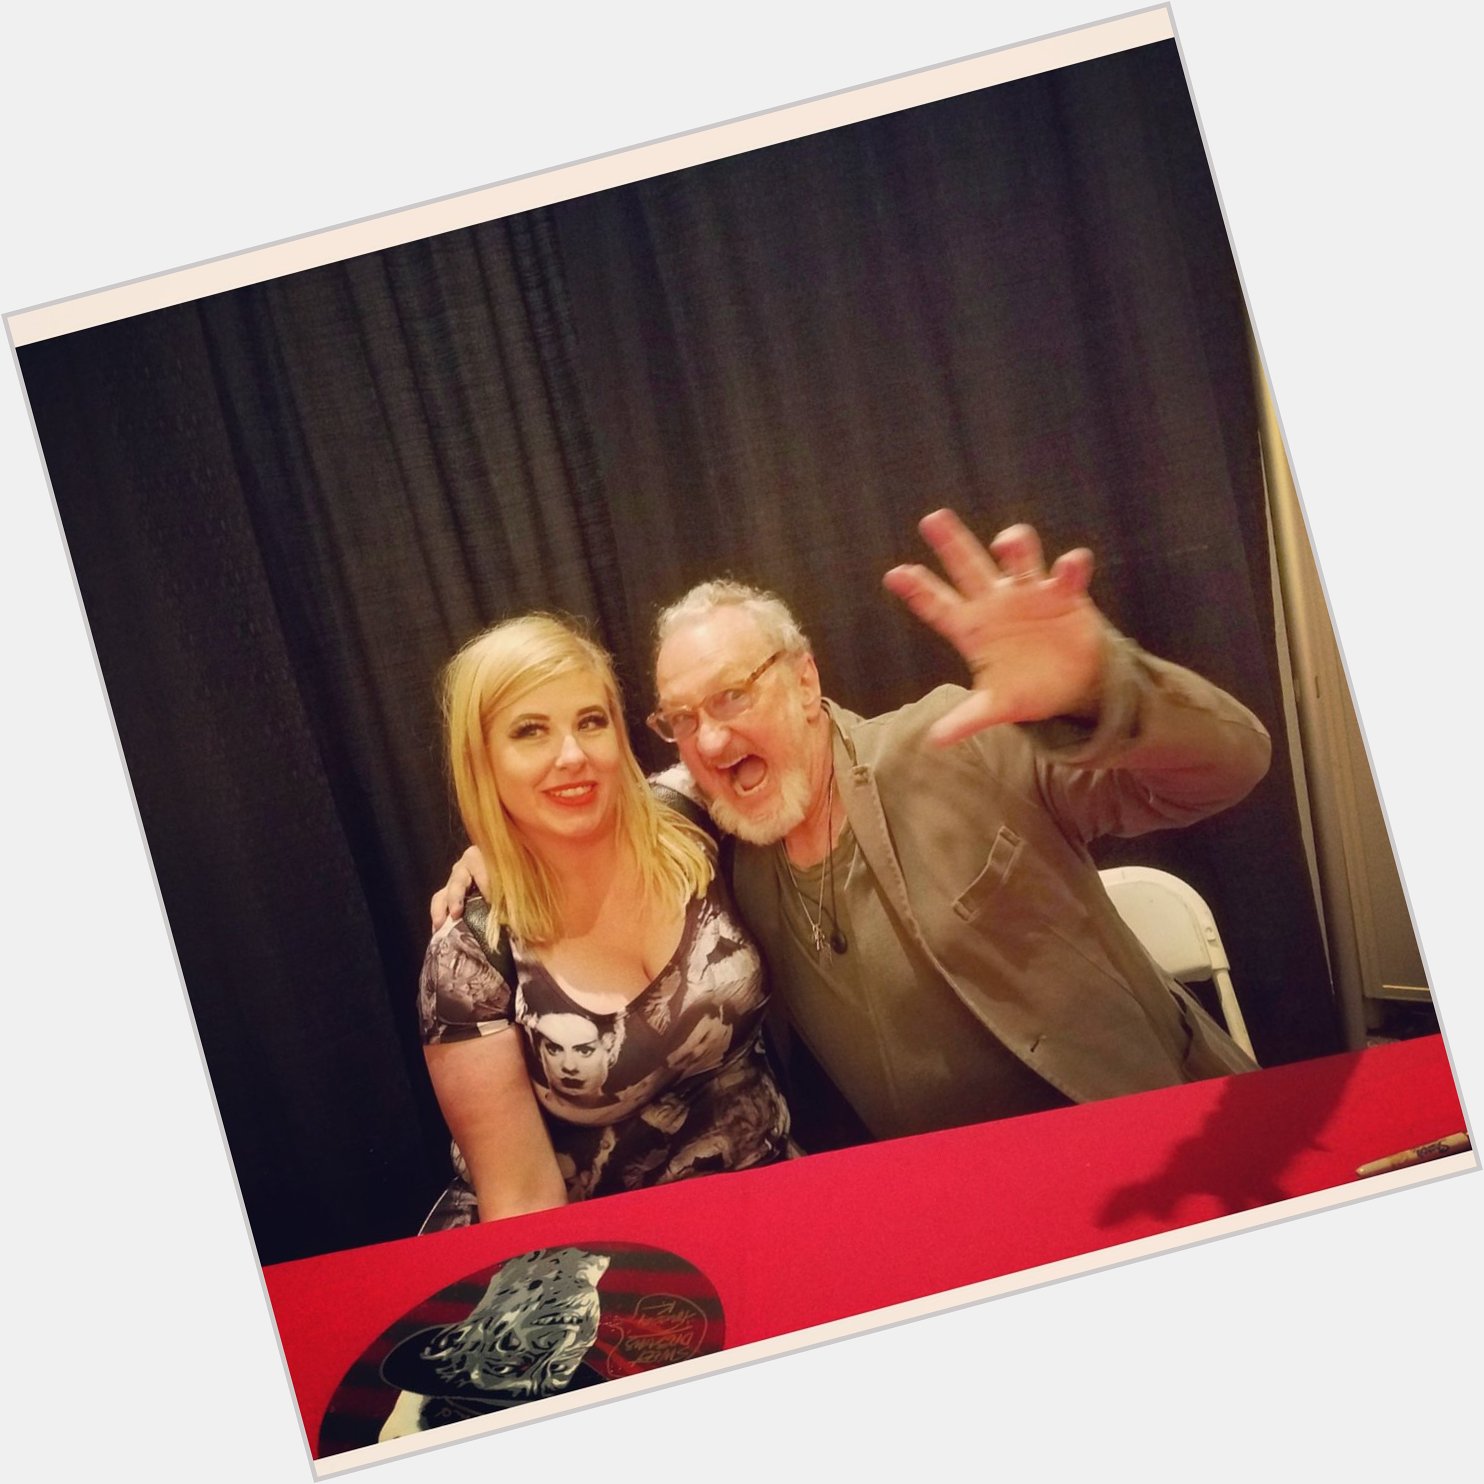 Happy Birthday Robert Englund! So glad I had the opportunity to meet him this year! 